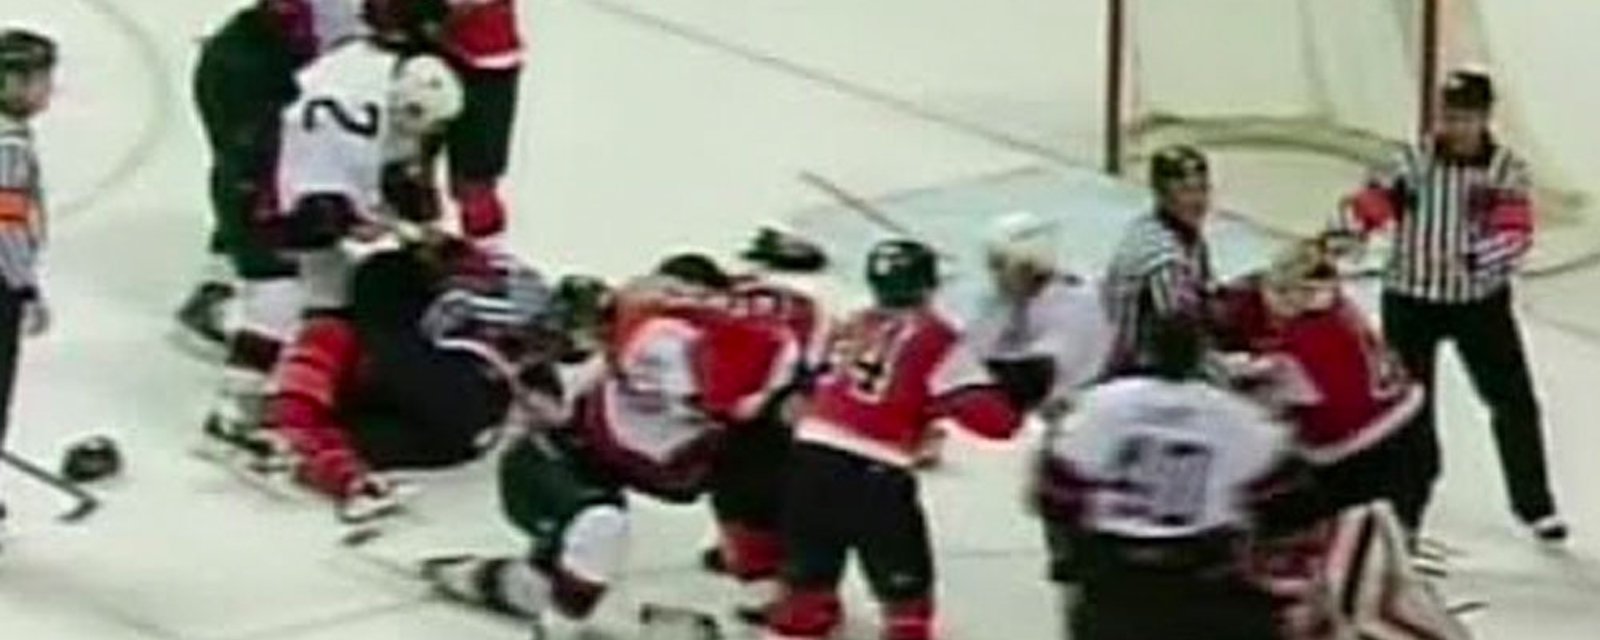 Throwback: Bench clearing brawl between Flyers and Sens ends in record breaking PIM!